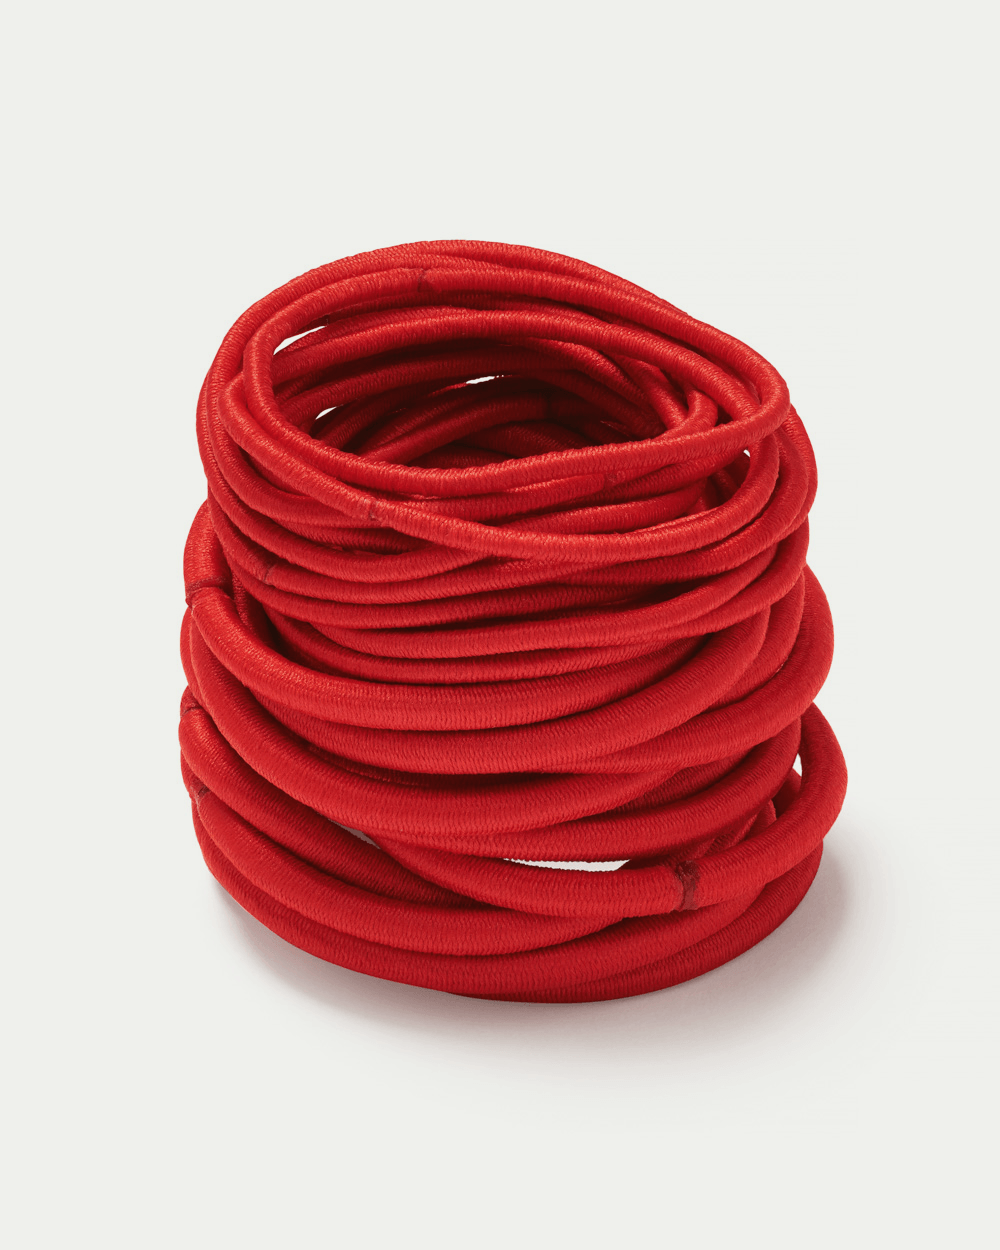 Back to School Value 30 Pack Hair Bands in Red